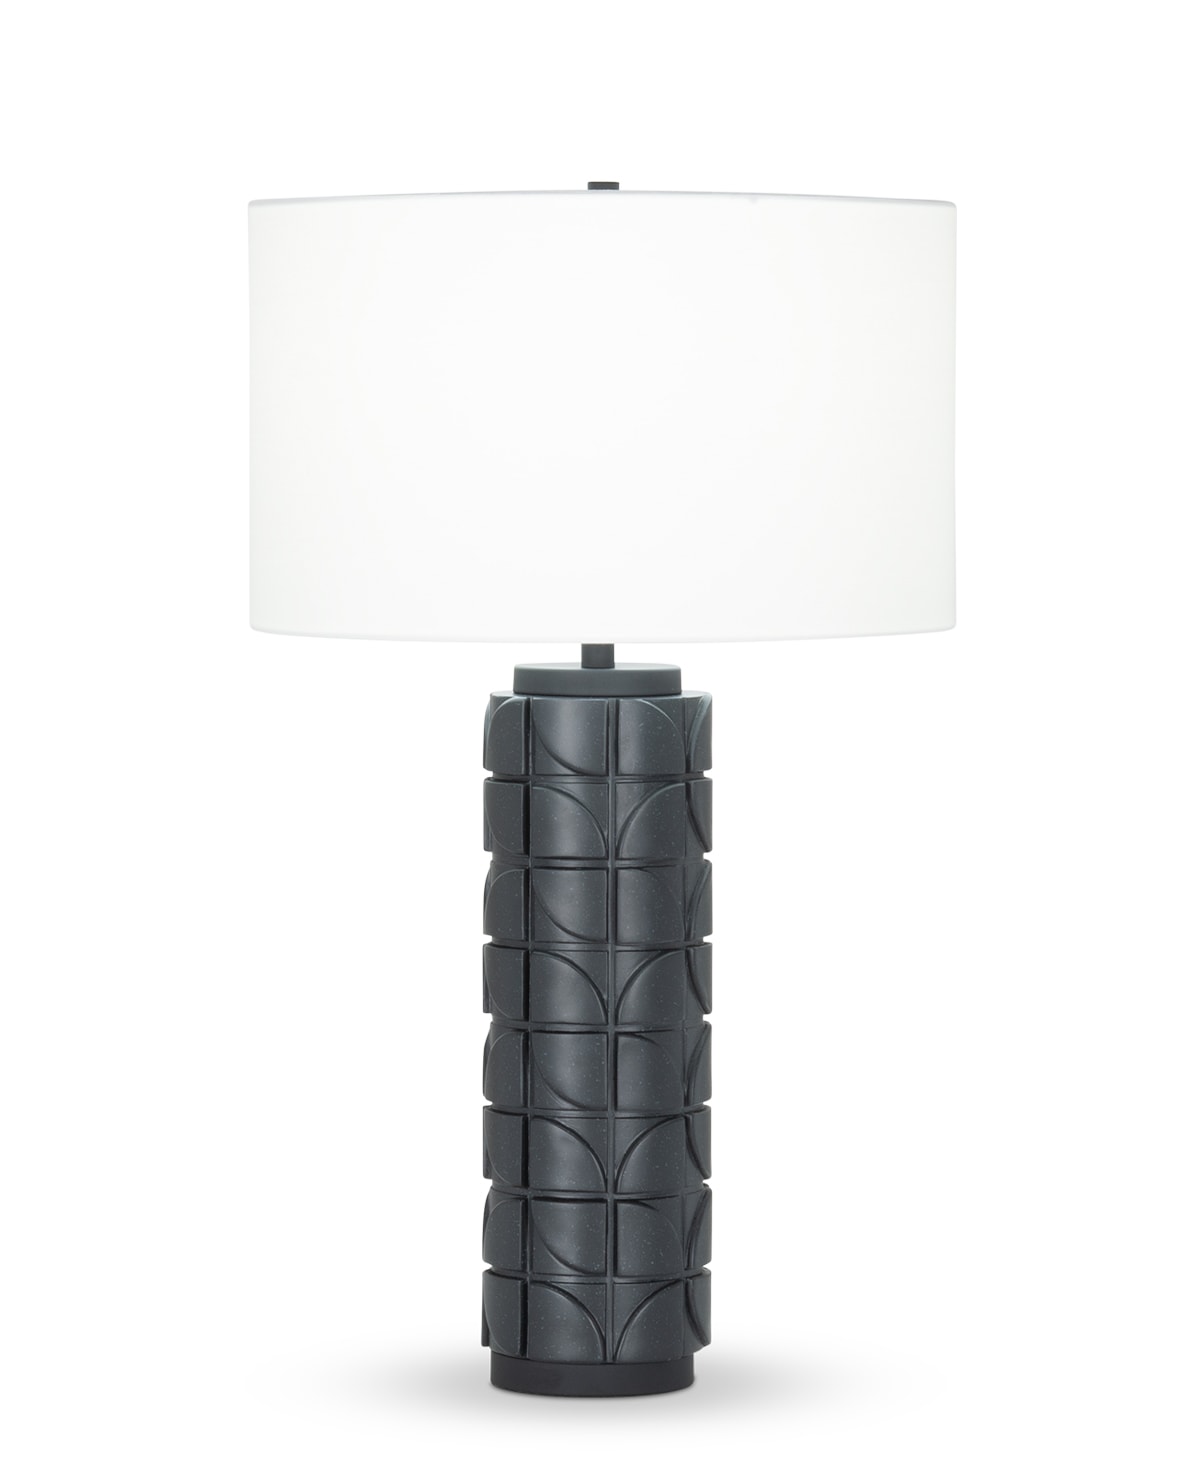 FlowDecor Mimi Table Lamp in resin with black finish and off-white cotton drum shade (# 4437)